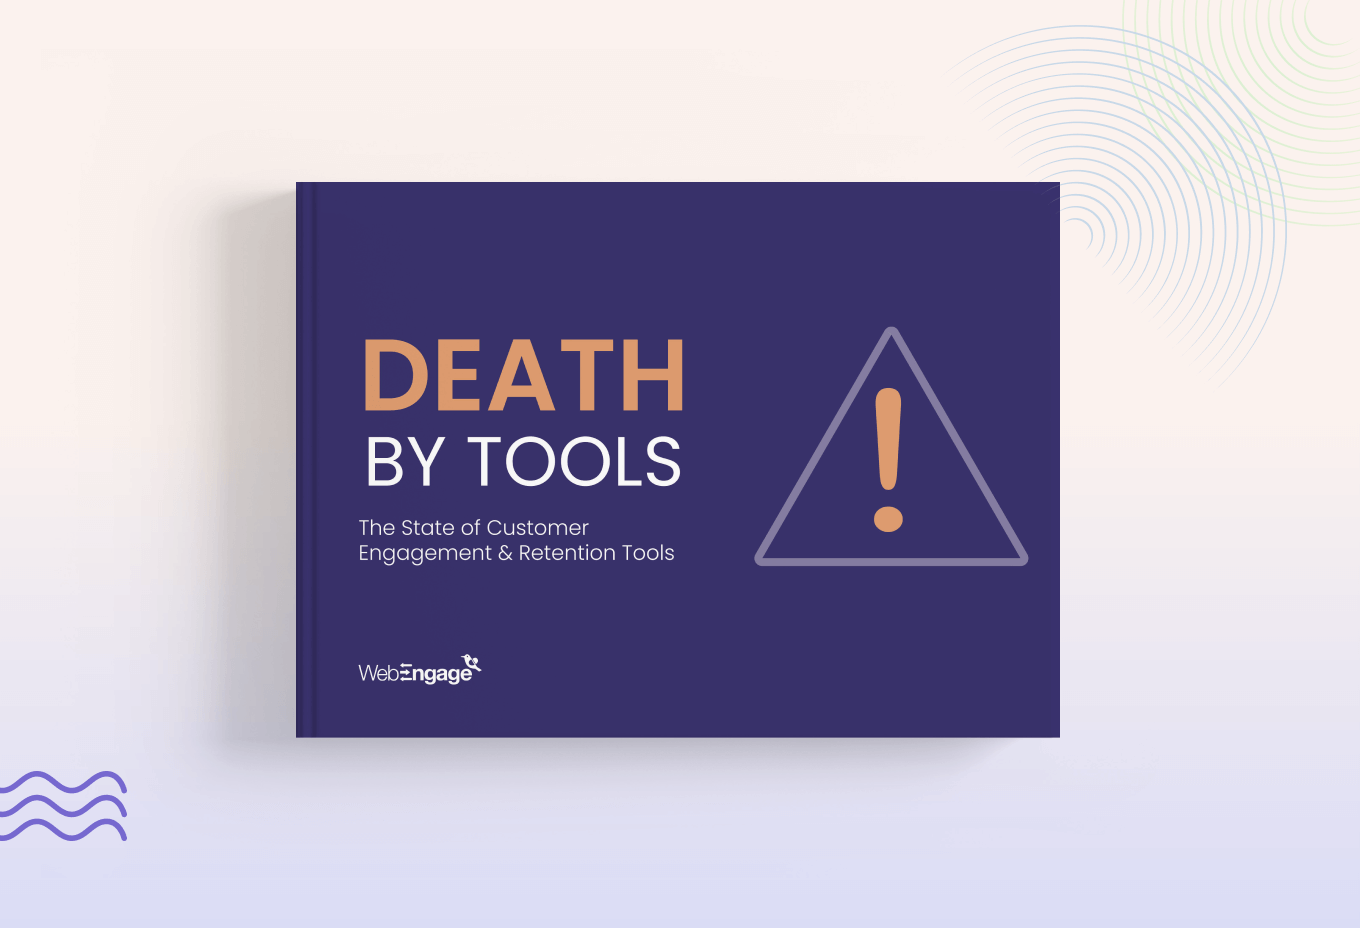 Death By Tools: The State of Customer Engagement & Retention Tools